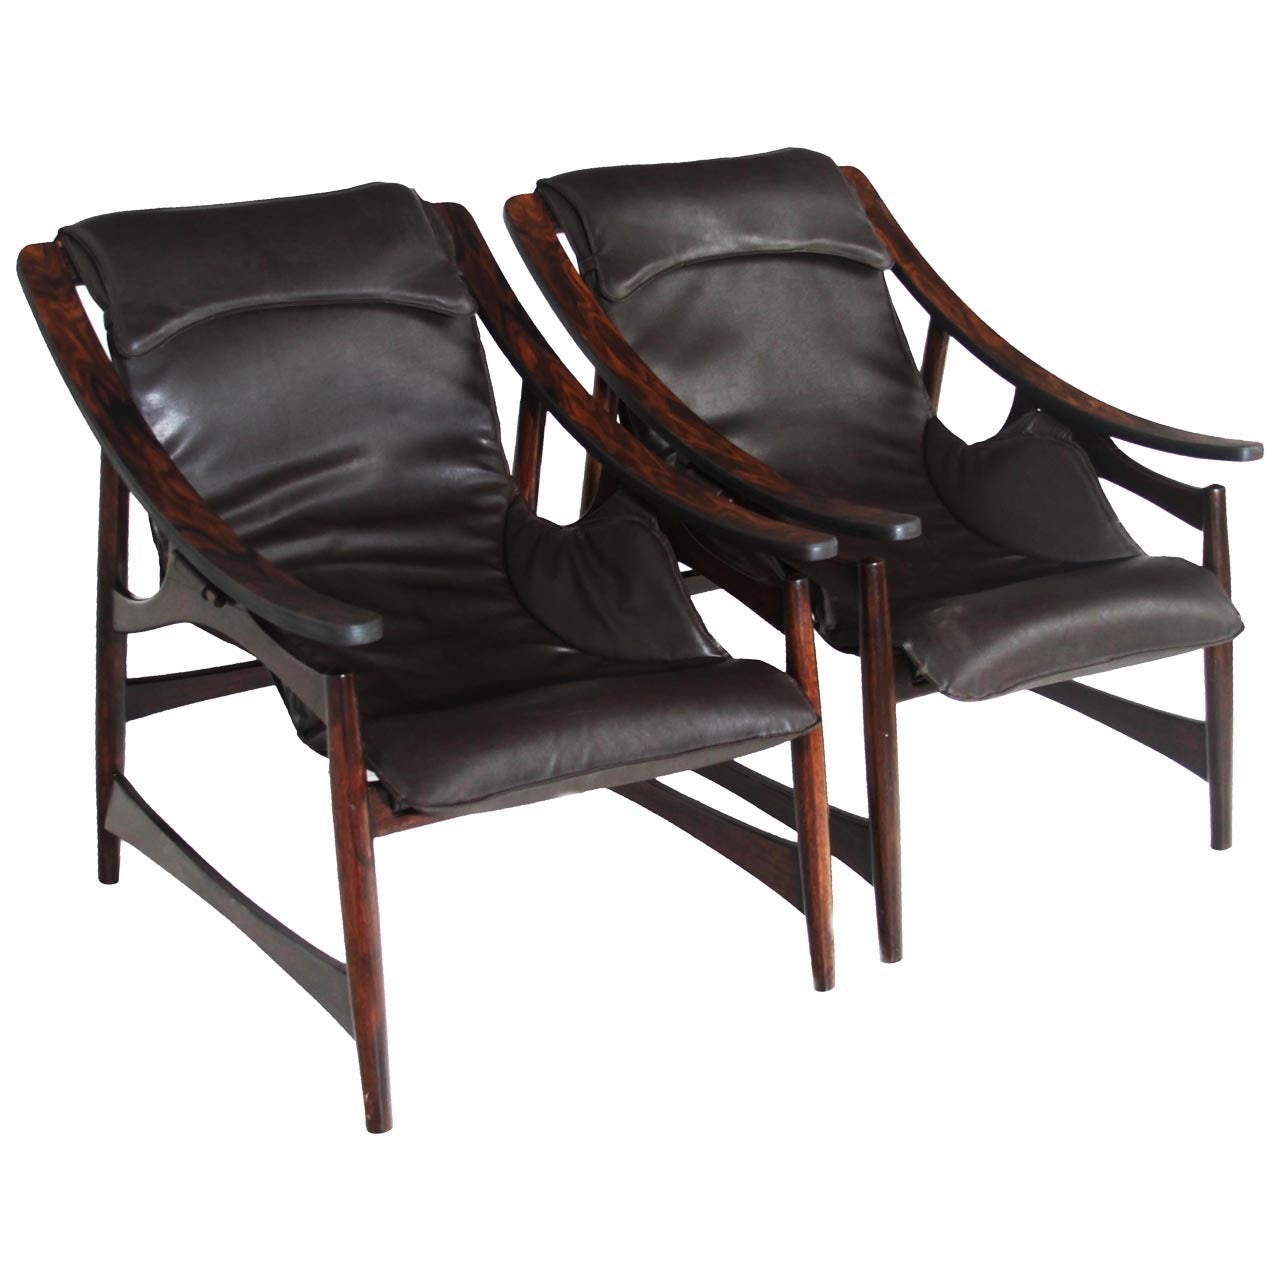 Pair of Liceu de Artes e Oficios Rosewood Lounge Chairs with Ottomans